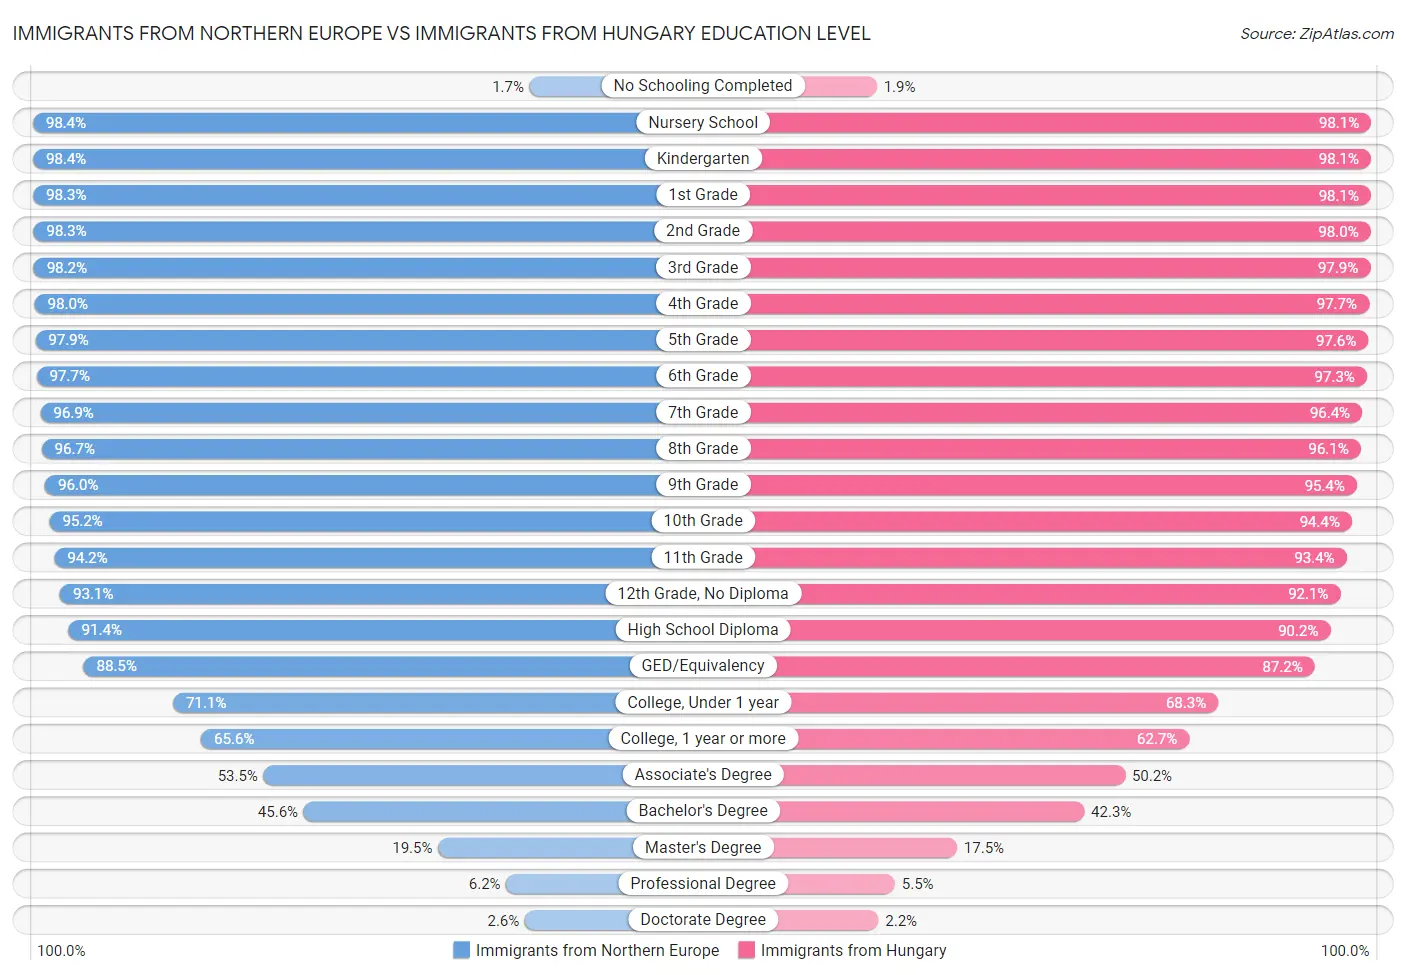 Immigrants from Northern Europe vs Immigrants from Hungary Education Level